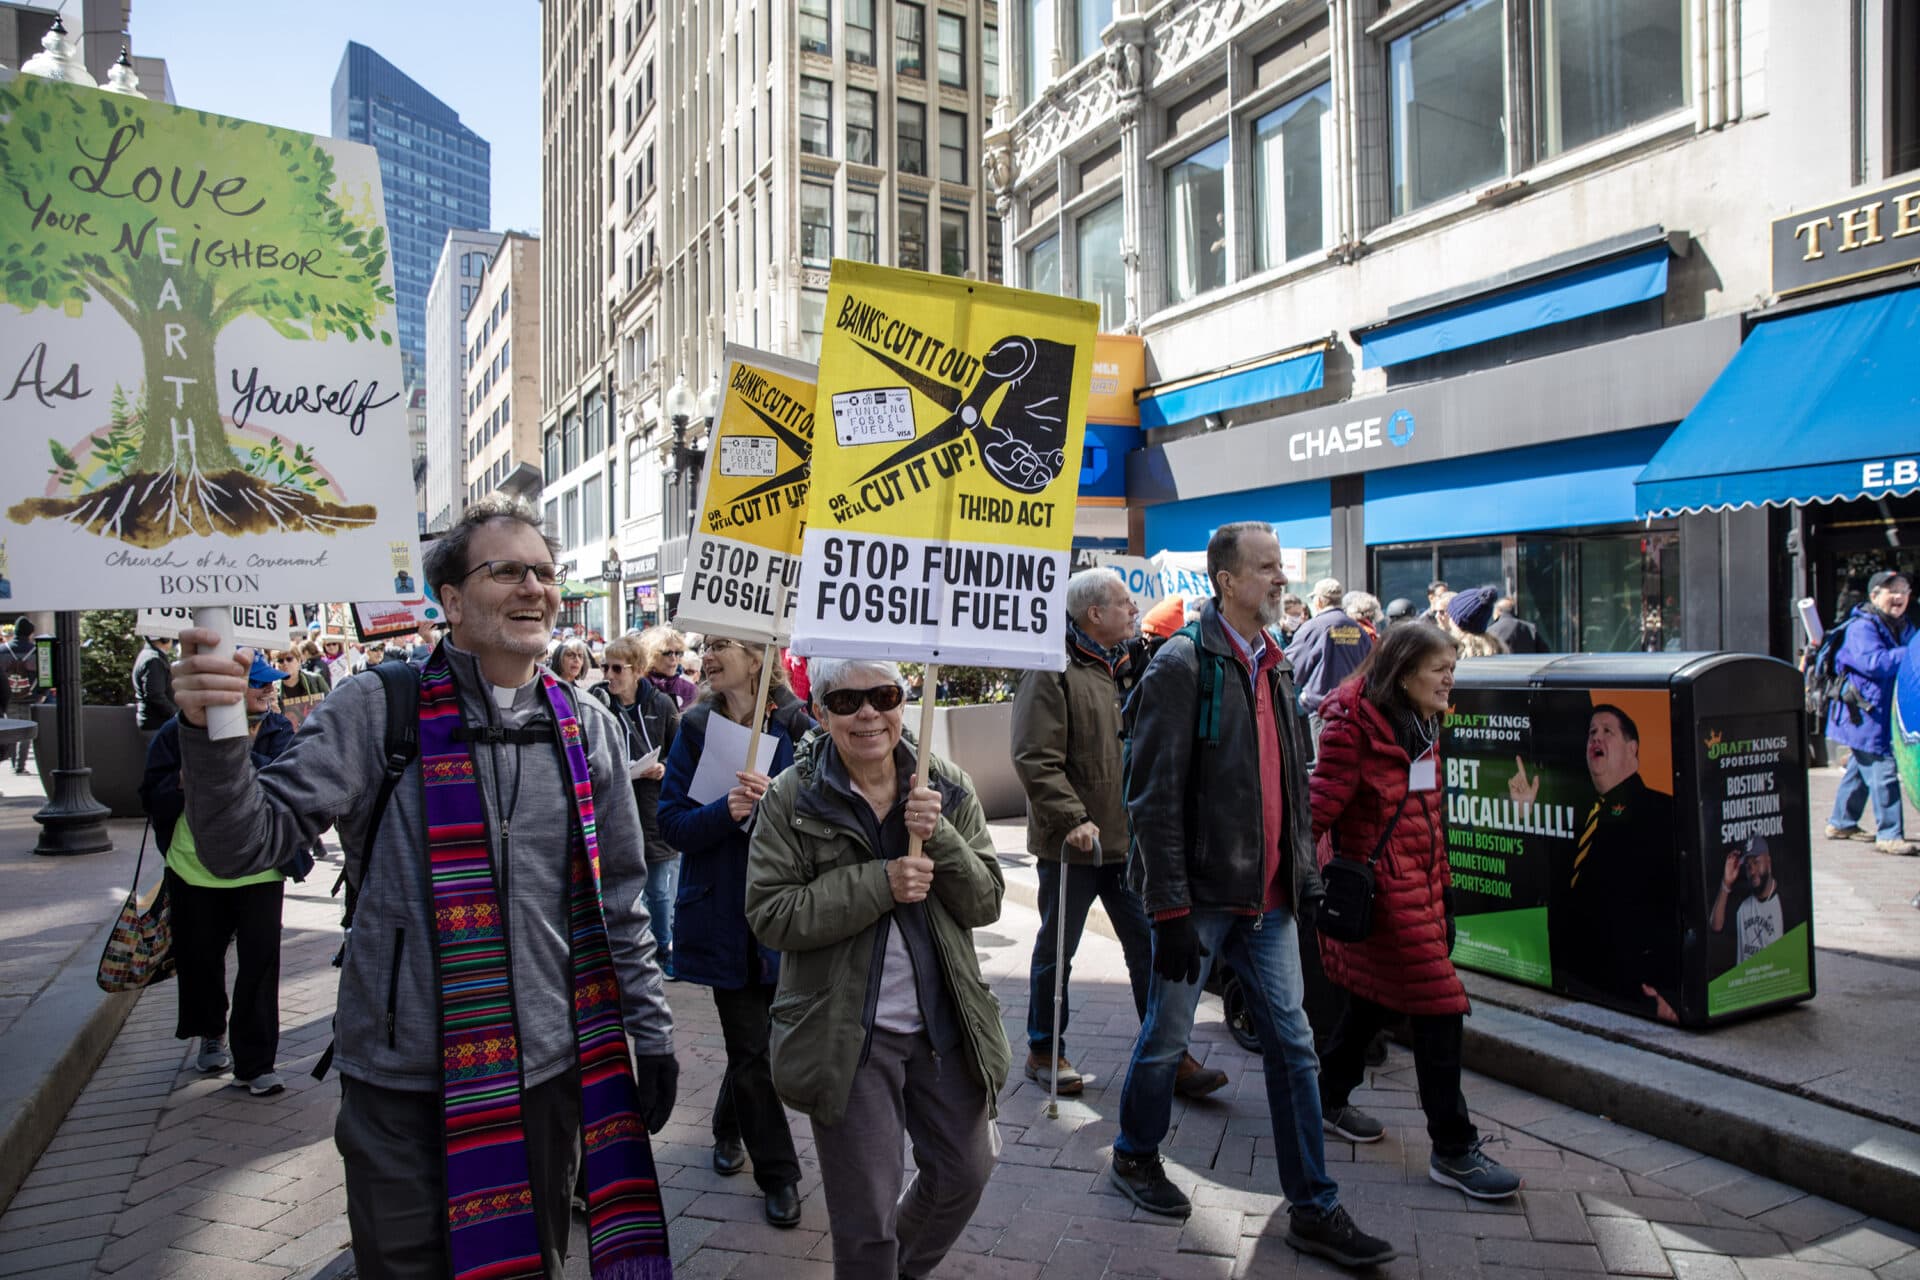 Protesters march past Chase Bank in downtown Boston, calling on banks for stop funding fossil fuel projects. (Credit: Robin Lubbock/WBUR)